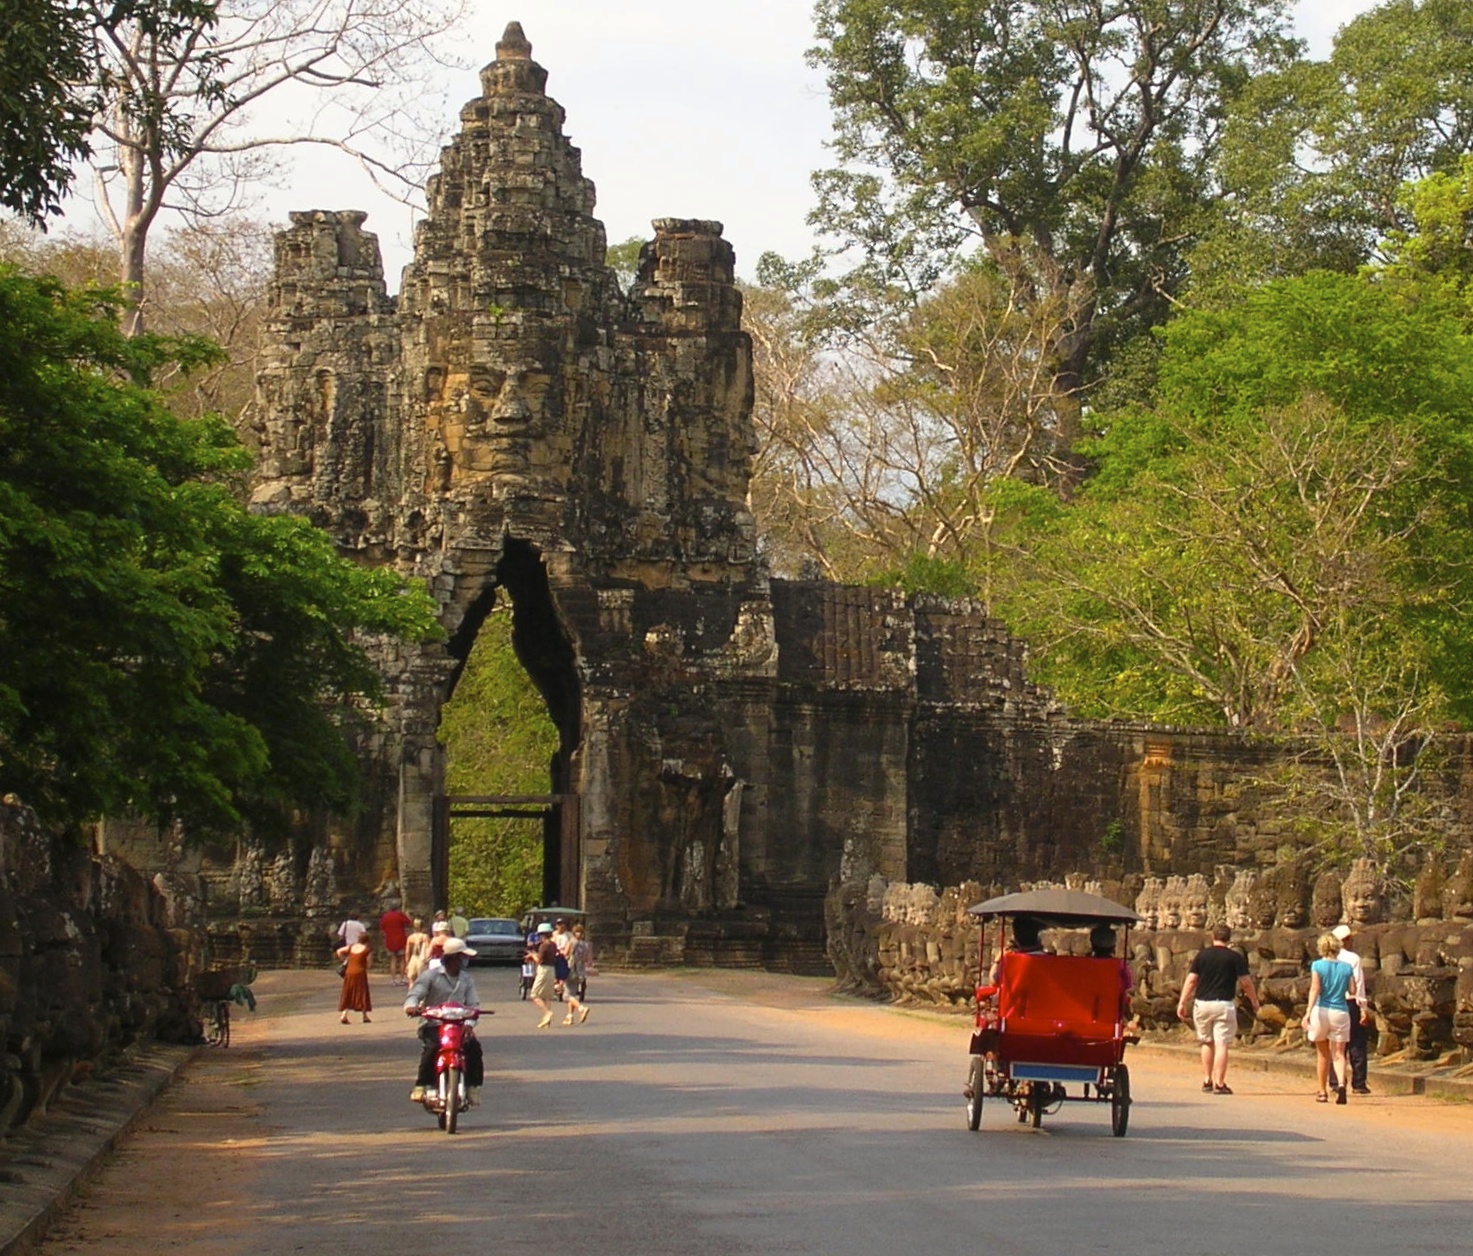 One of the many entries into Angkor Thom. Buddha faces line the streets! Photo by Marla Norman.